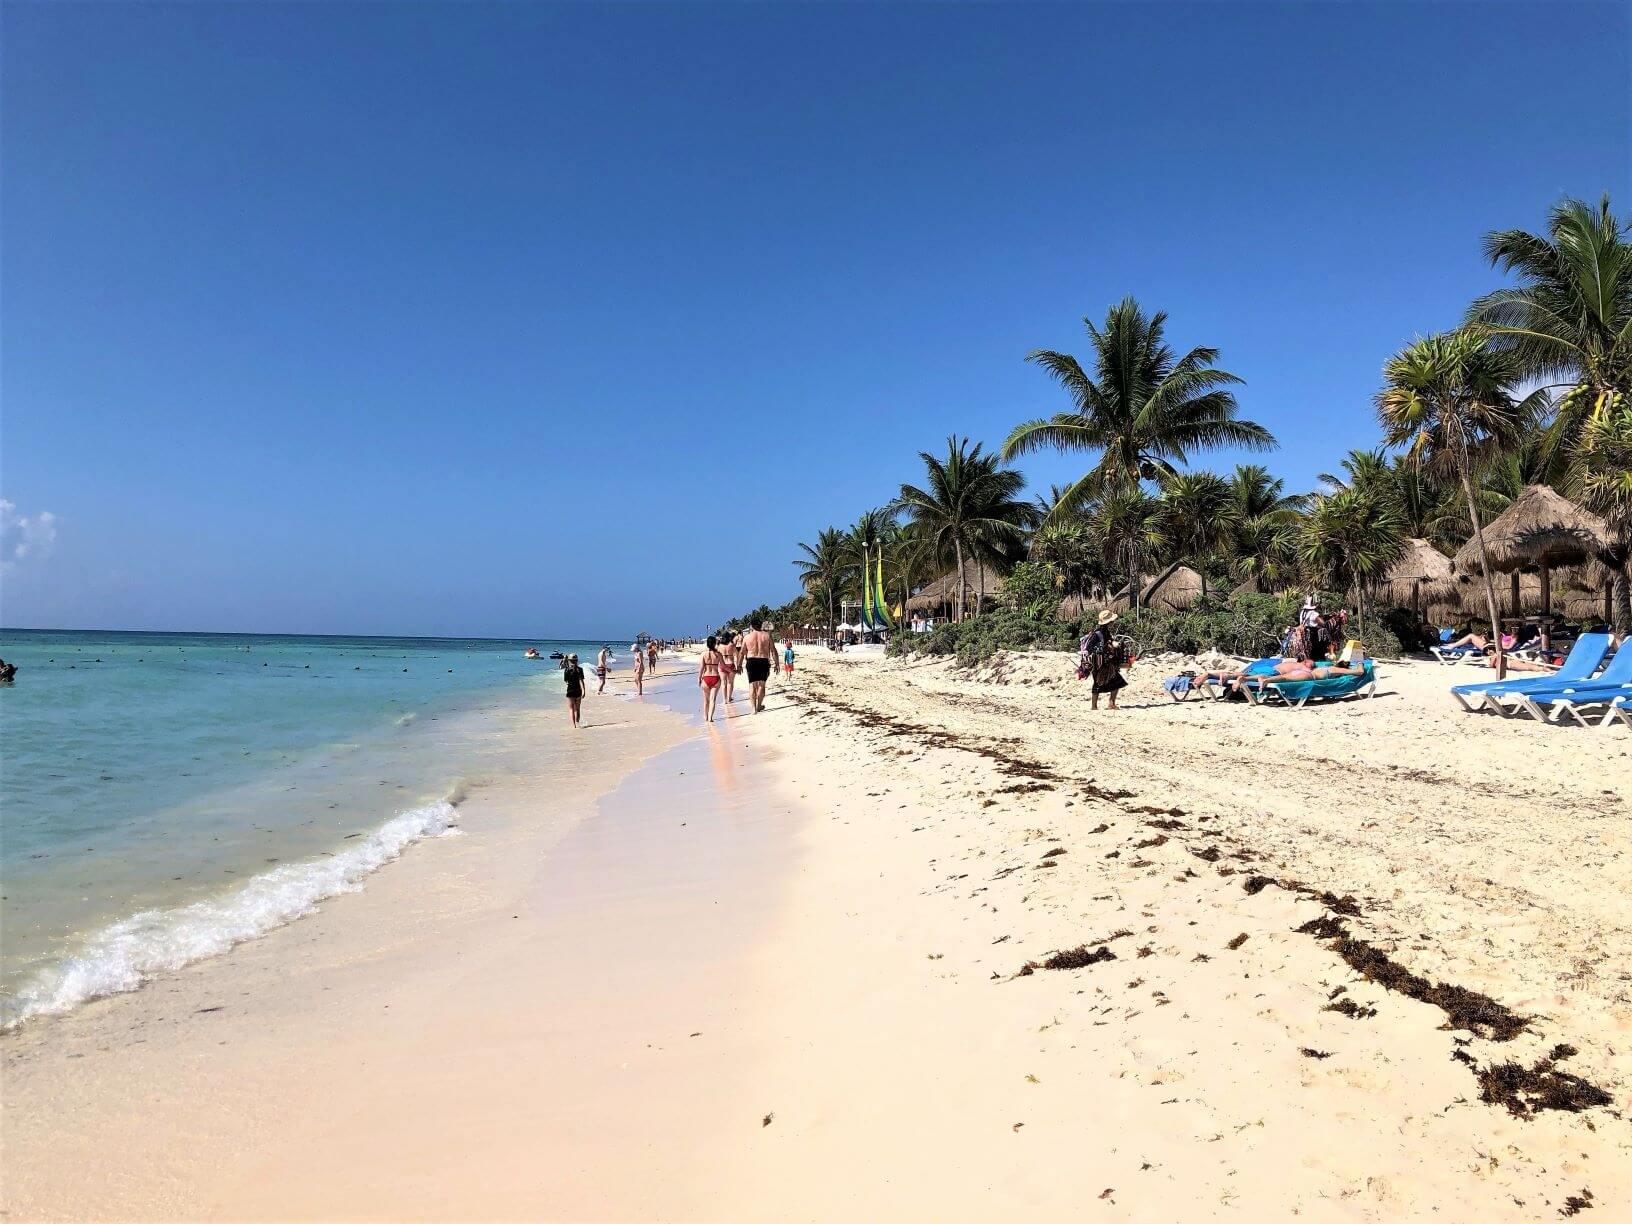 beach in Mexico with sand, surf, and people in swimming suits.